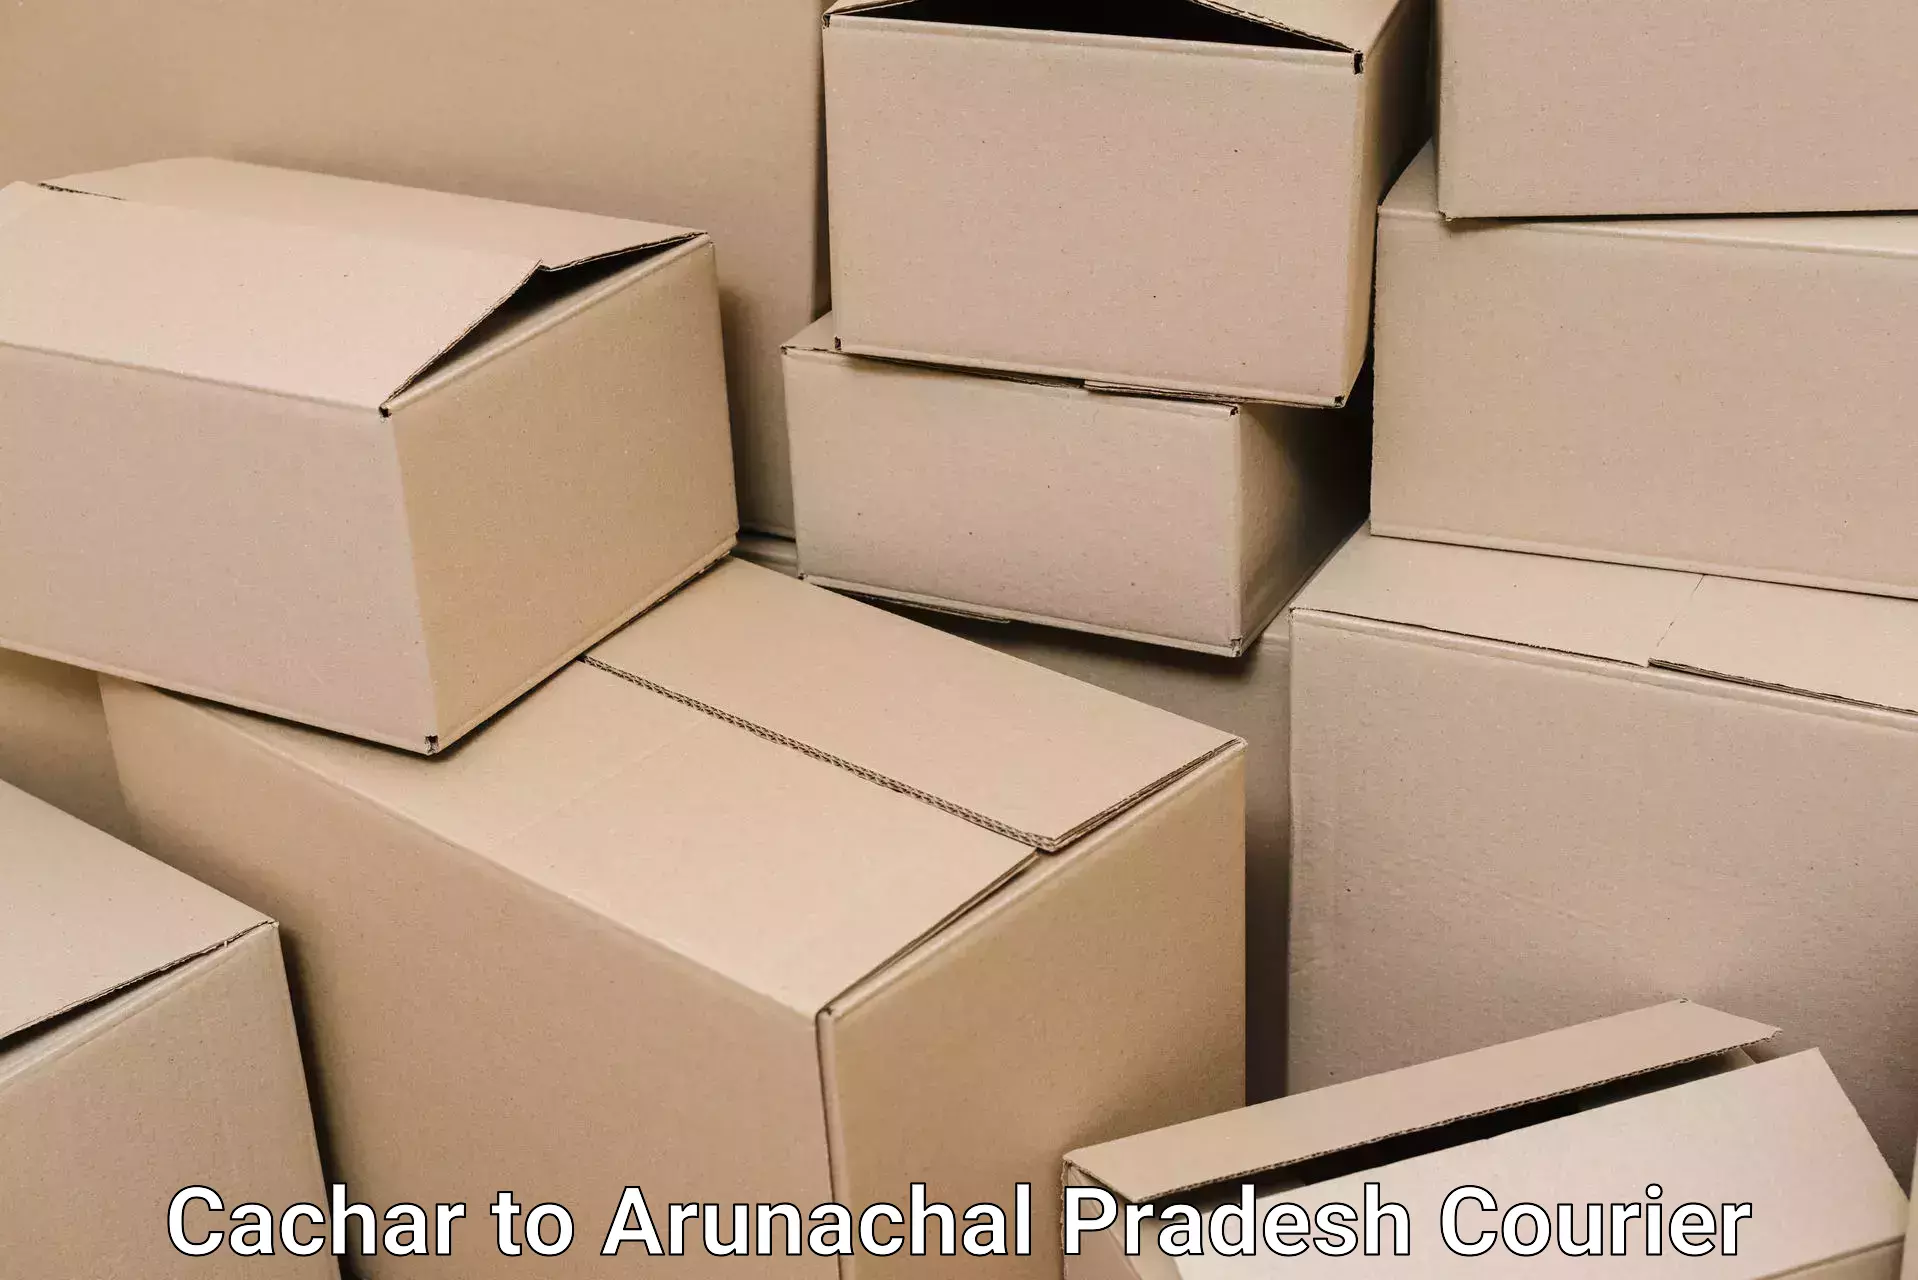 Efficient packing and moving Cachar to Diyun